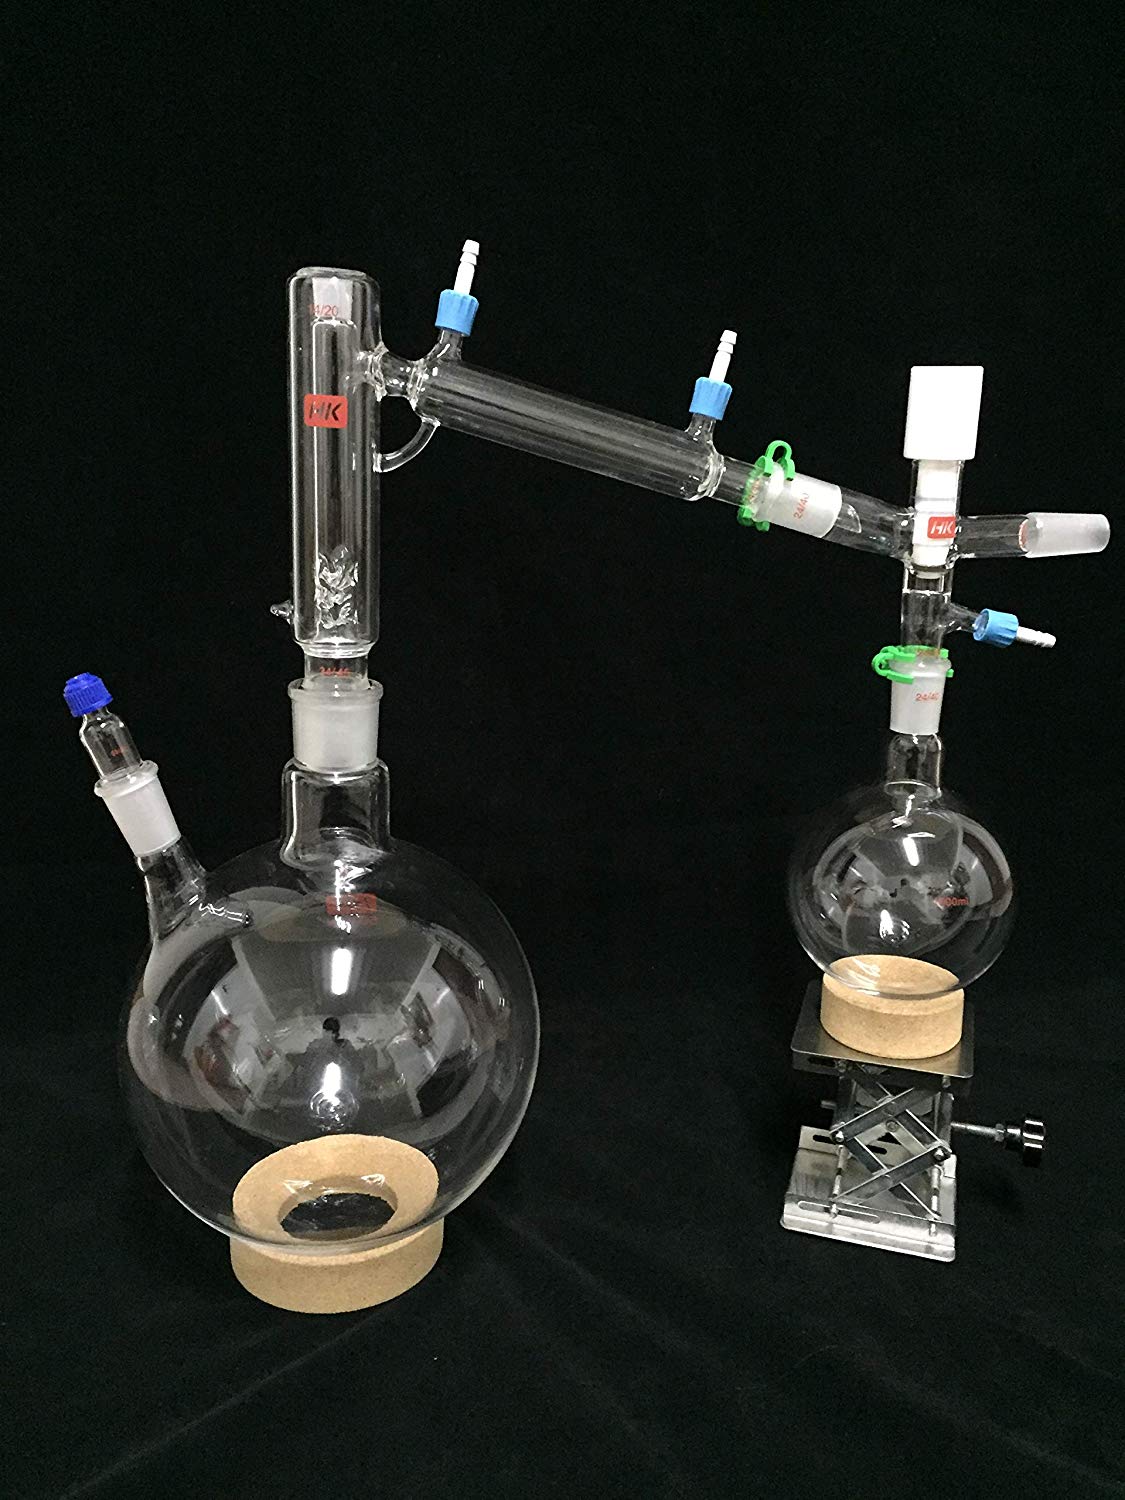 5L 75 Degree Short Path Distillation Head with Anti-Reflux Capture Plate,45/50 and 24/40 Joint